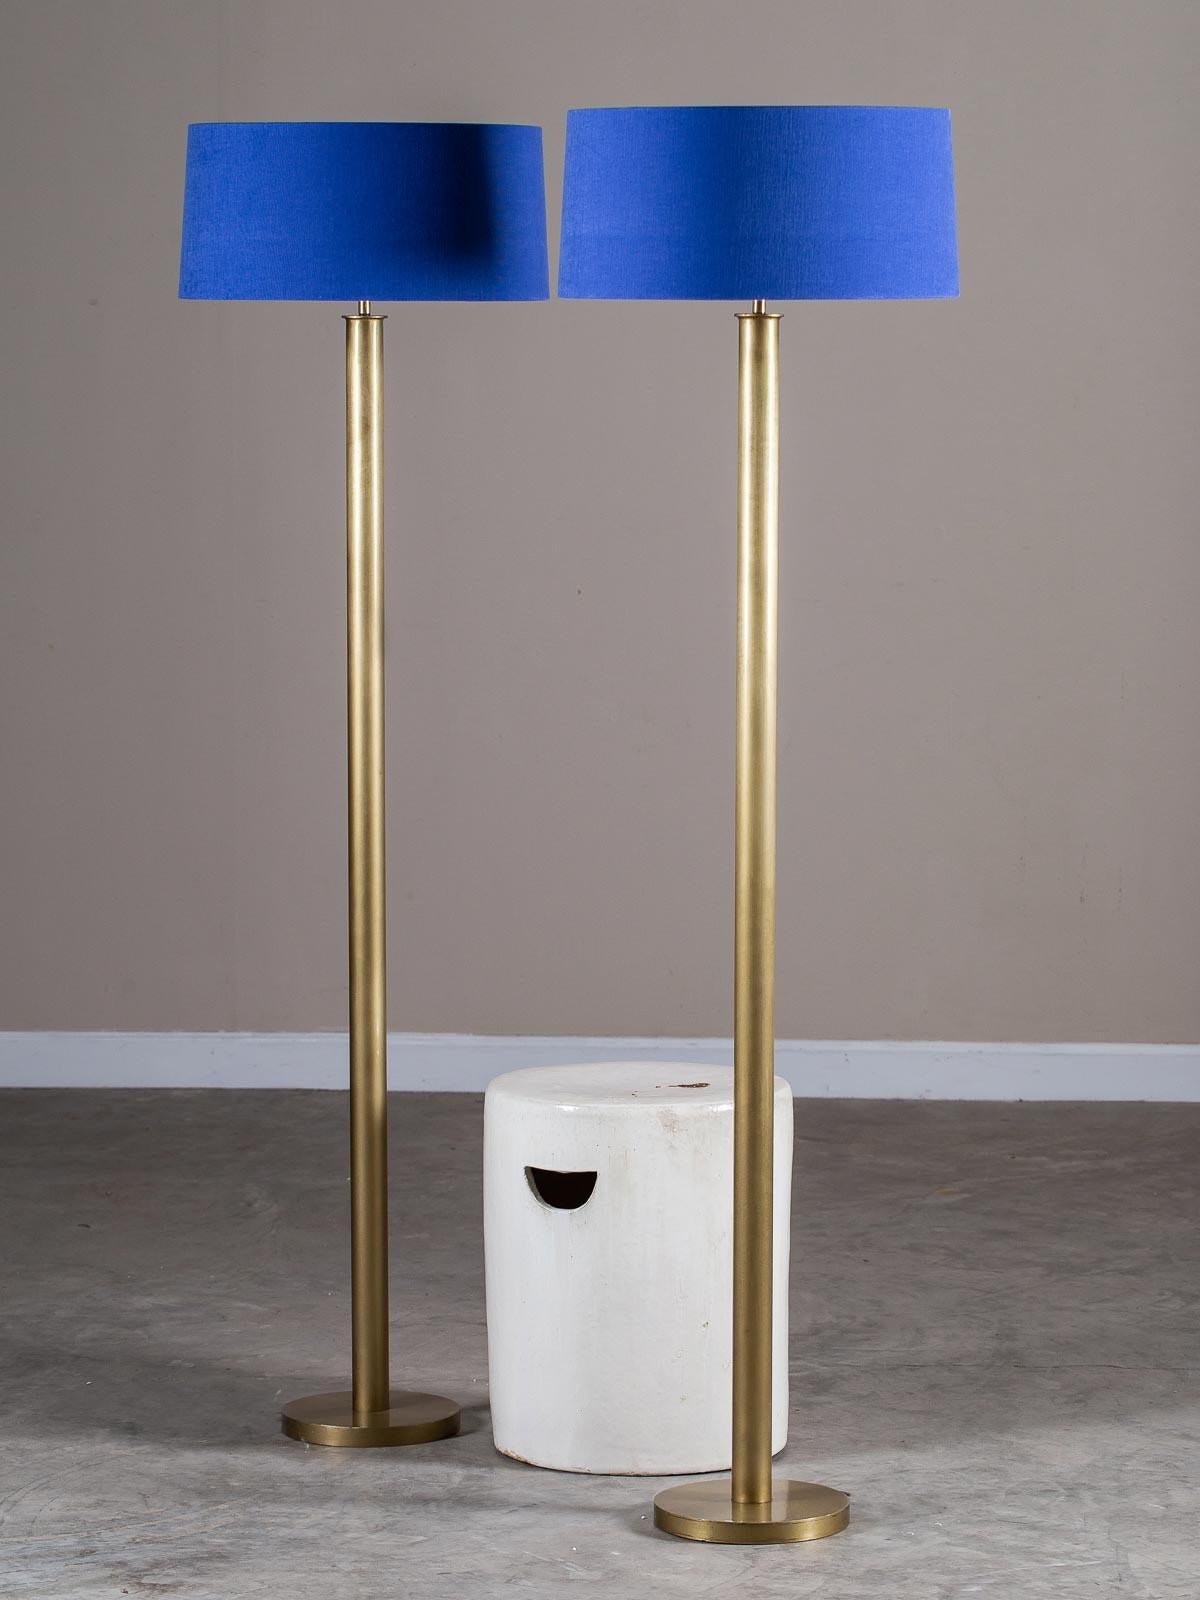 We love the utter simplicity of these modern brass floor lamps from Holland with their custom-made Delft blue linen contemporary shades. The circular base of each lamp supports a circular column with straight sides before reaching the European